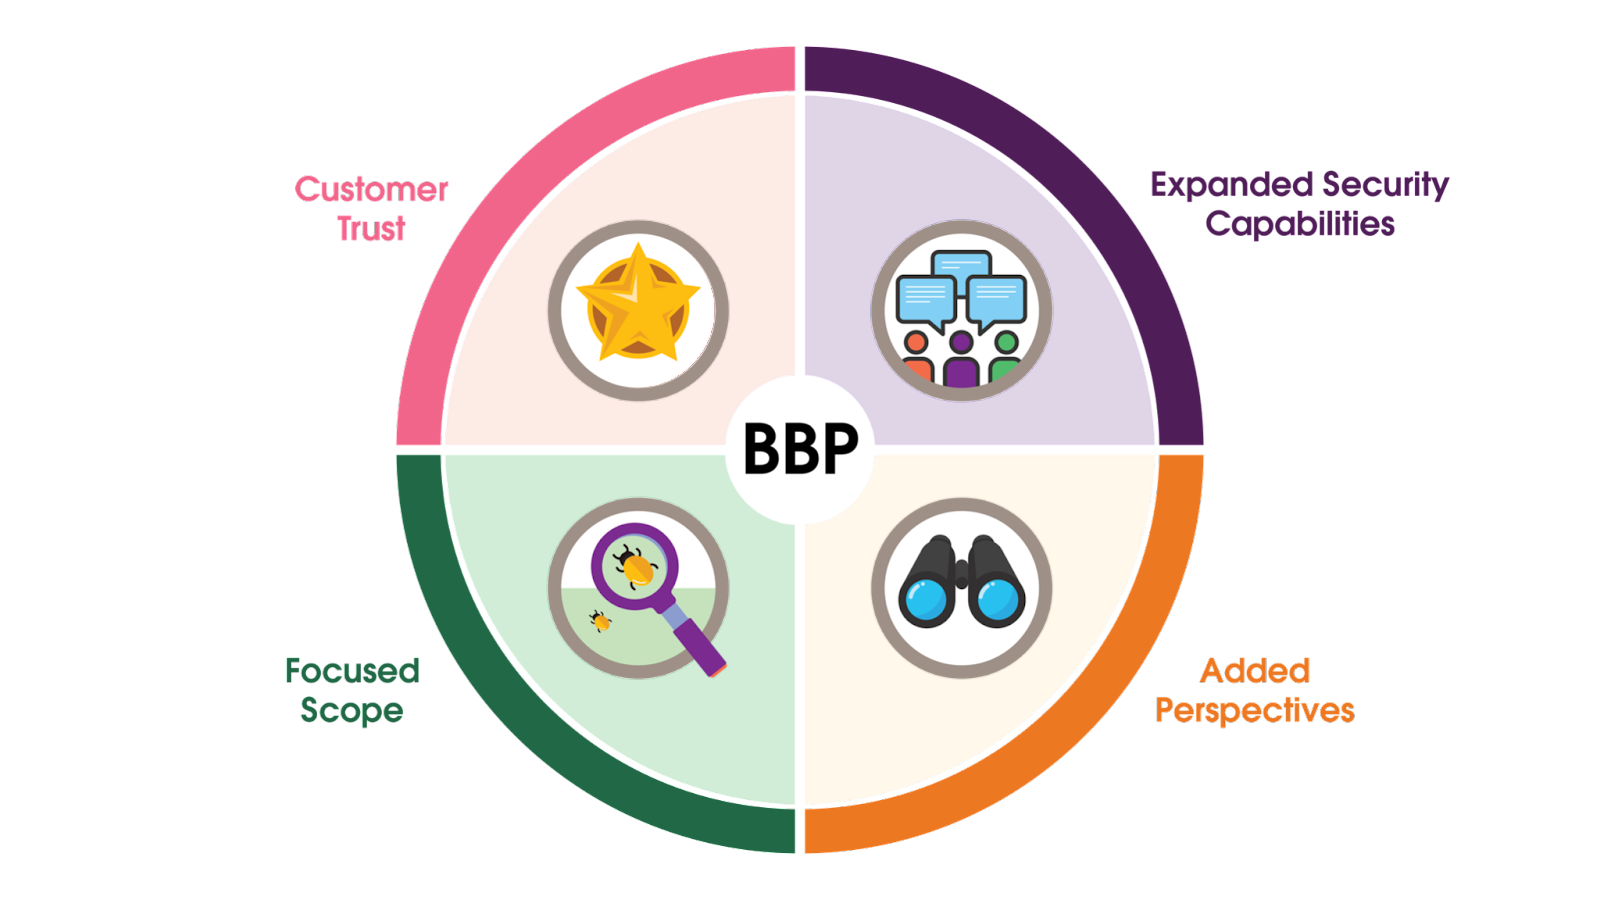 BBP benefits are represented as a circle with four quadrants: 1. Expanded Security Capabilities (crowd of people talking) 2. Customer Trust (gold star), 3. Focused Scope (magnifying glass over a bug) 4. Added Perspectives (binoculars)